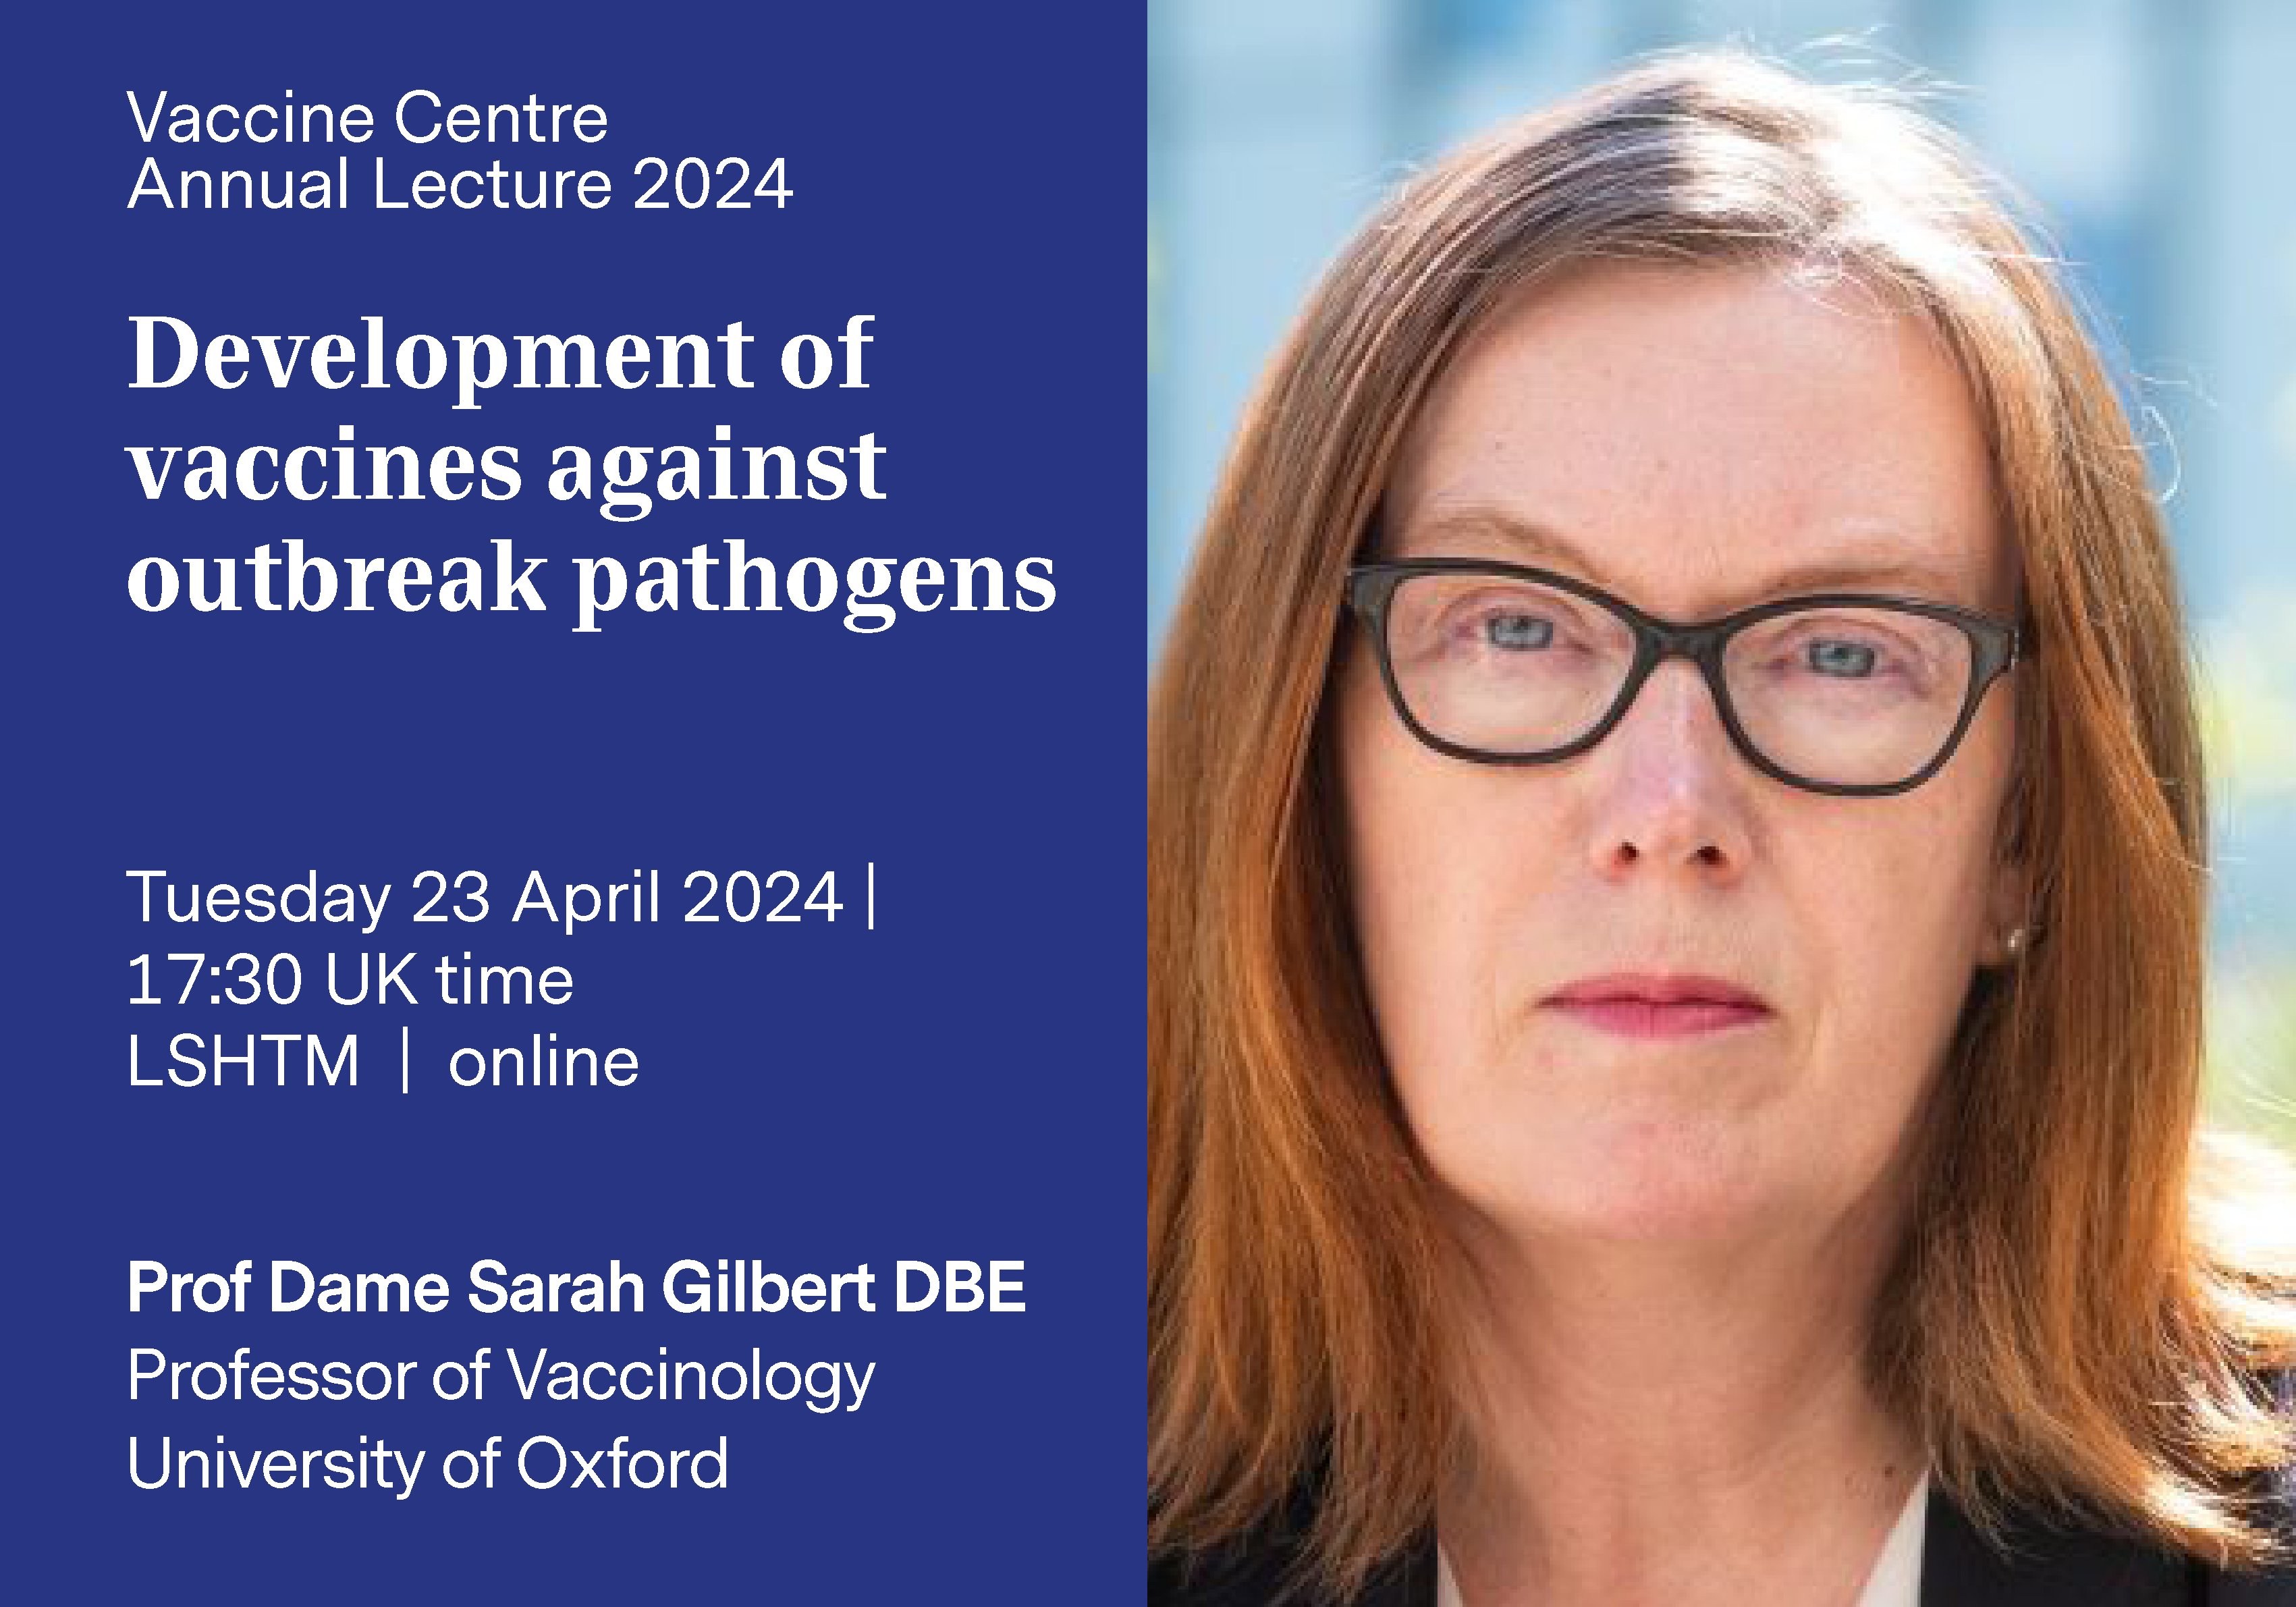 Event card for the VaC annual lecture given by Prof Dame Sarah Gilbert